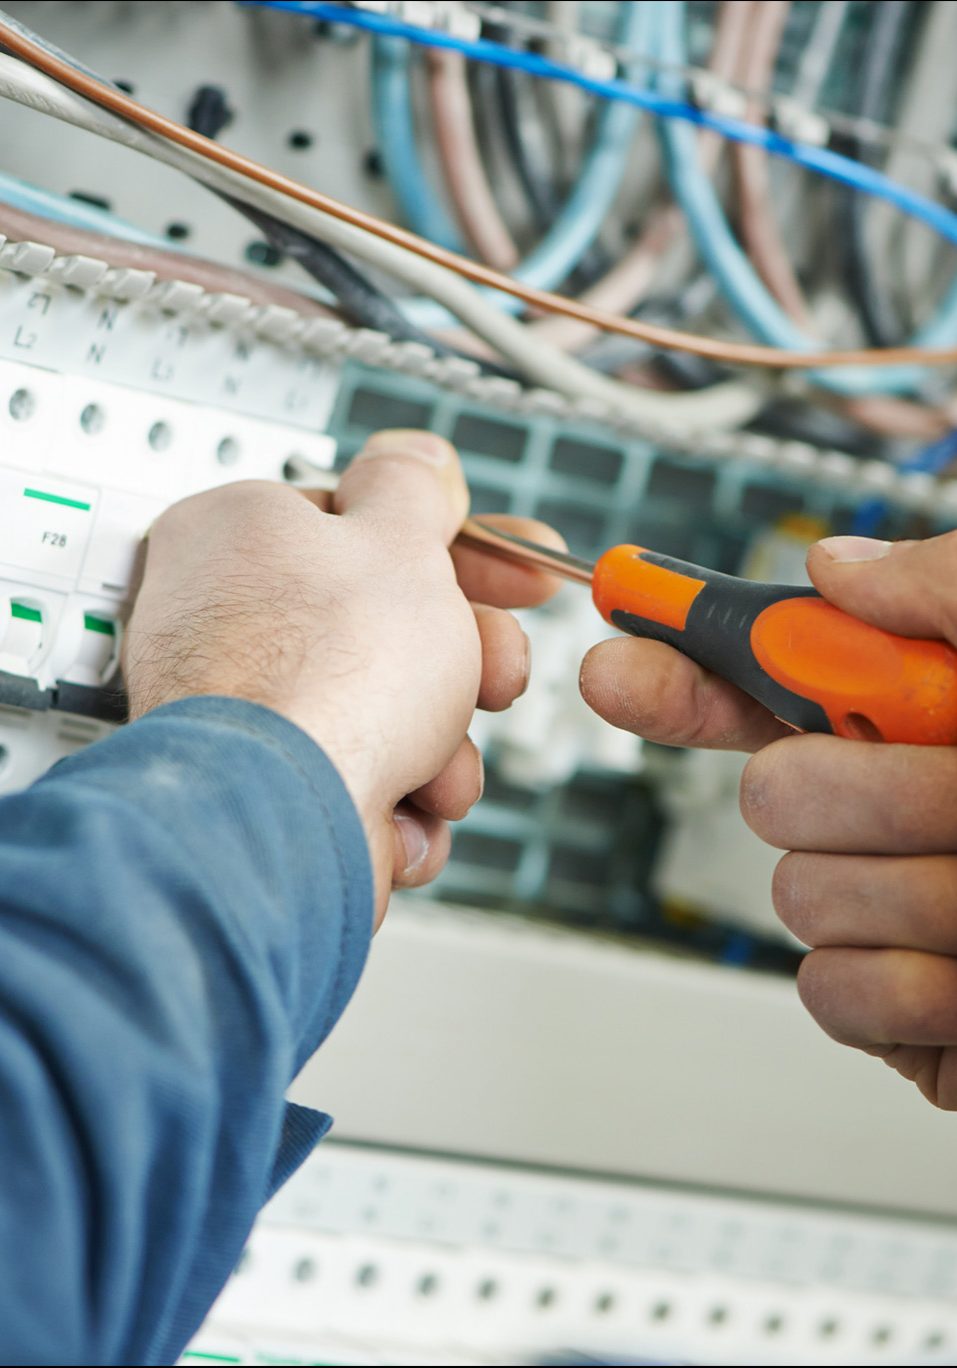 An image of an electrician testing a fuse box